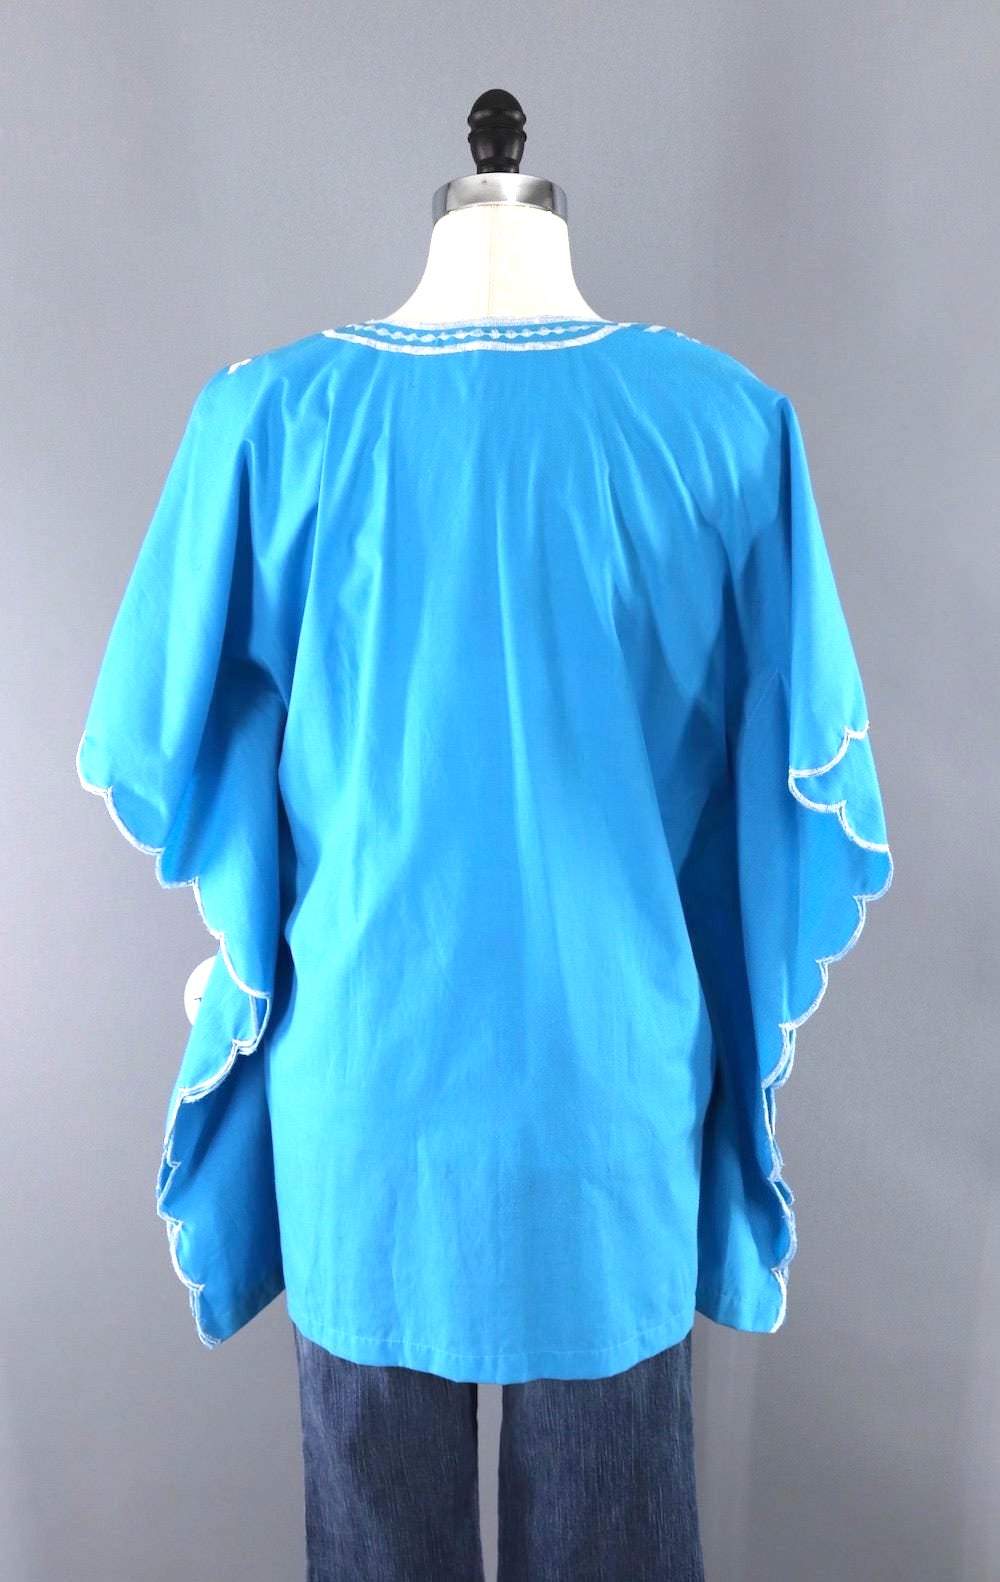 Vintage 1960s Turquoise Blue Embroidered Tunic Blouse-ThisBlueBird - Modern Vintage